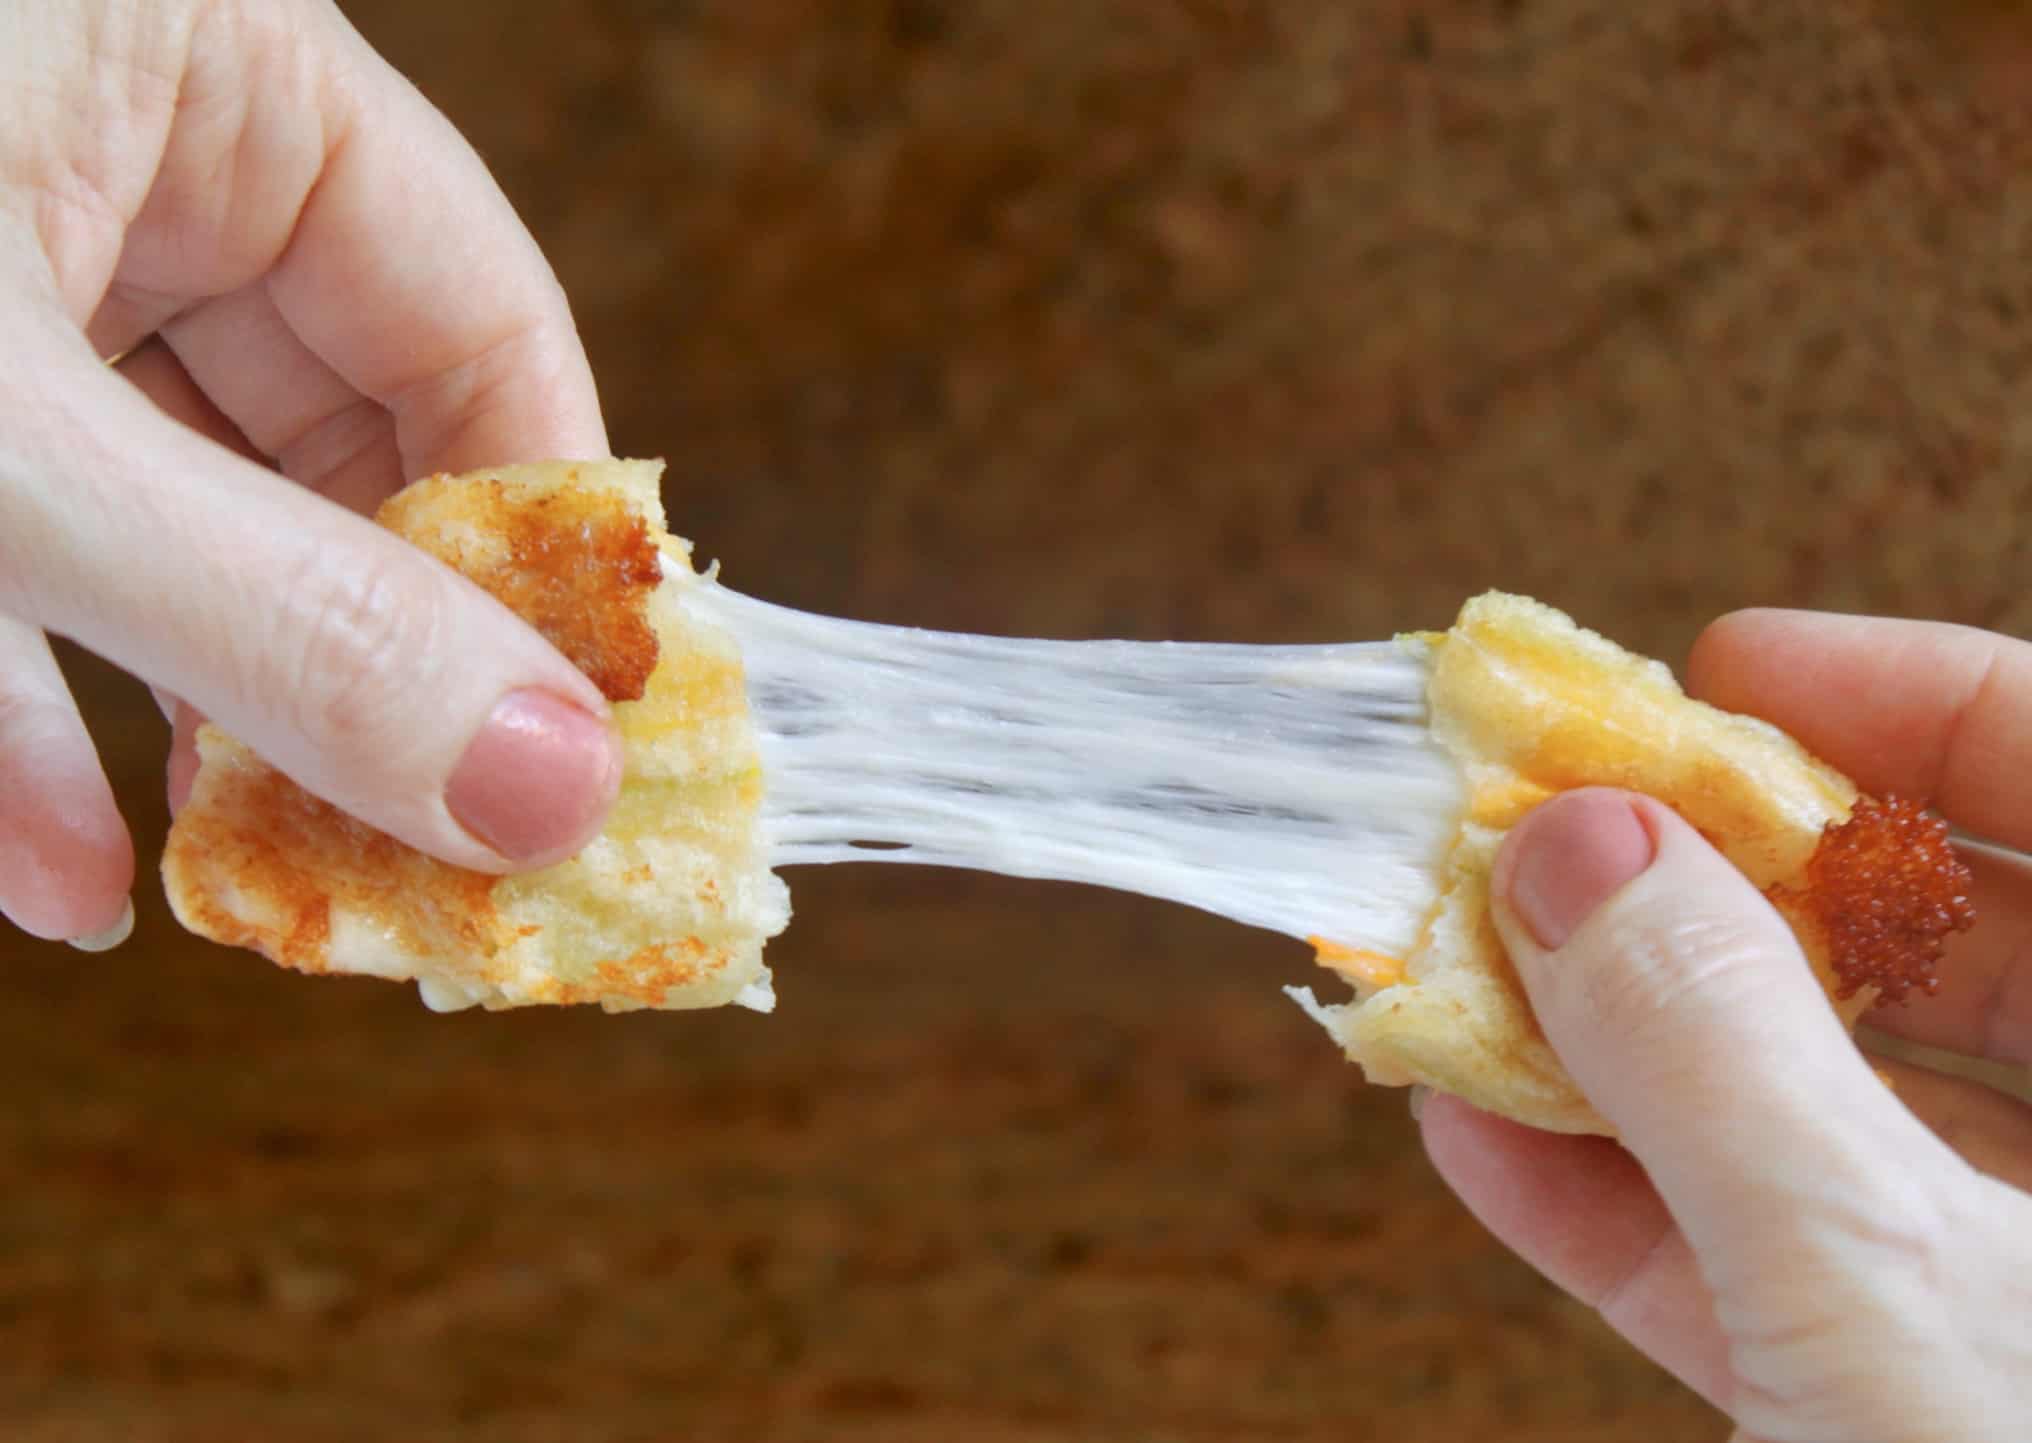 Crispy mozzarella cheese stick is being pulled apart by hands, showing the stretchy, melted cheese inside.